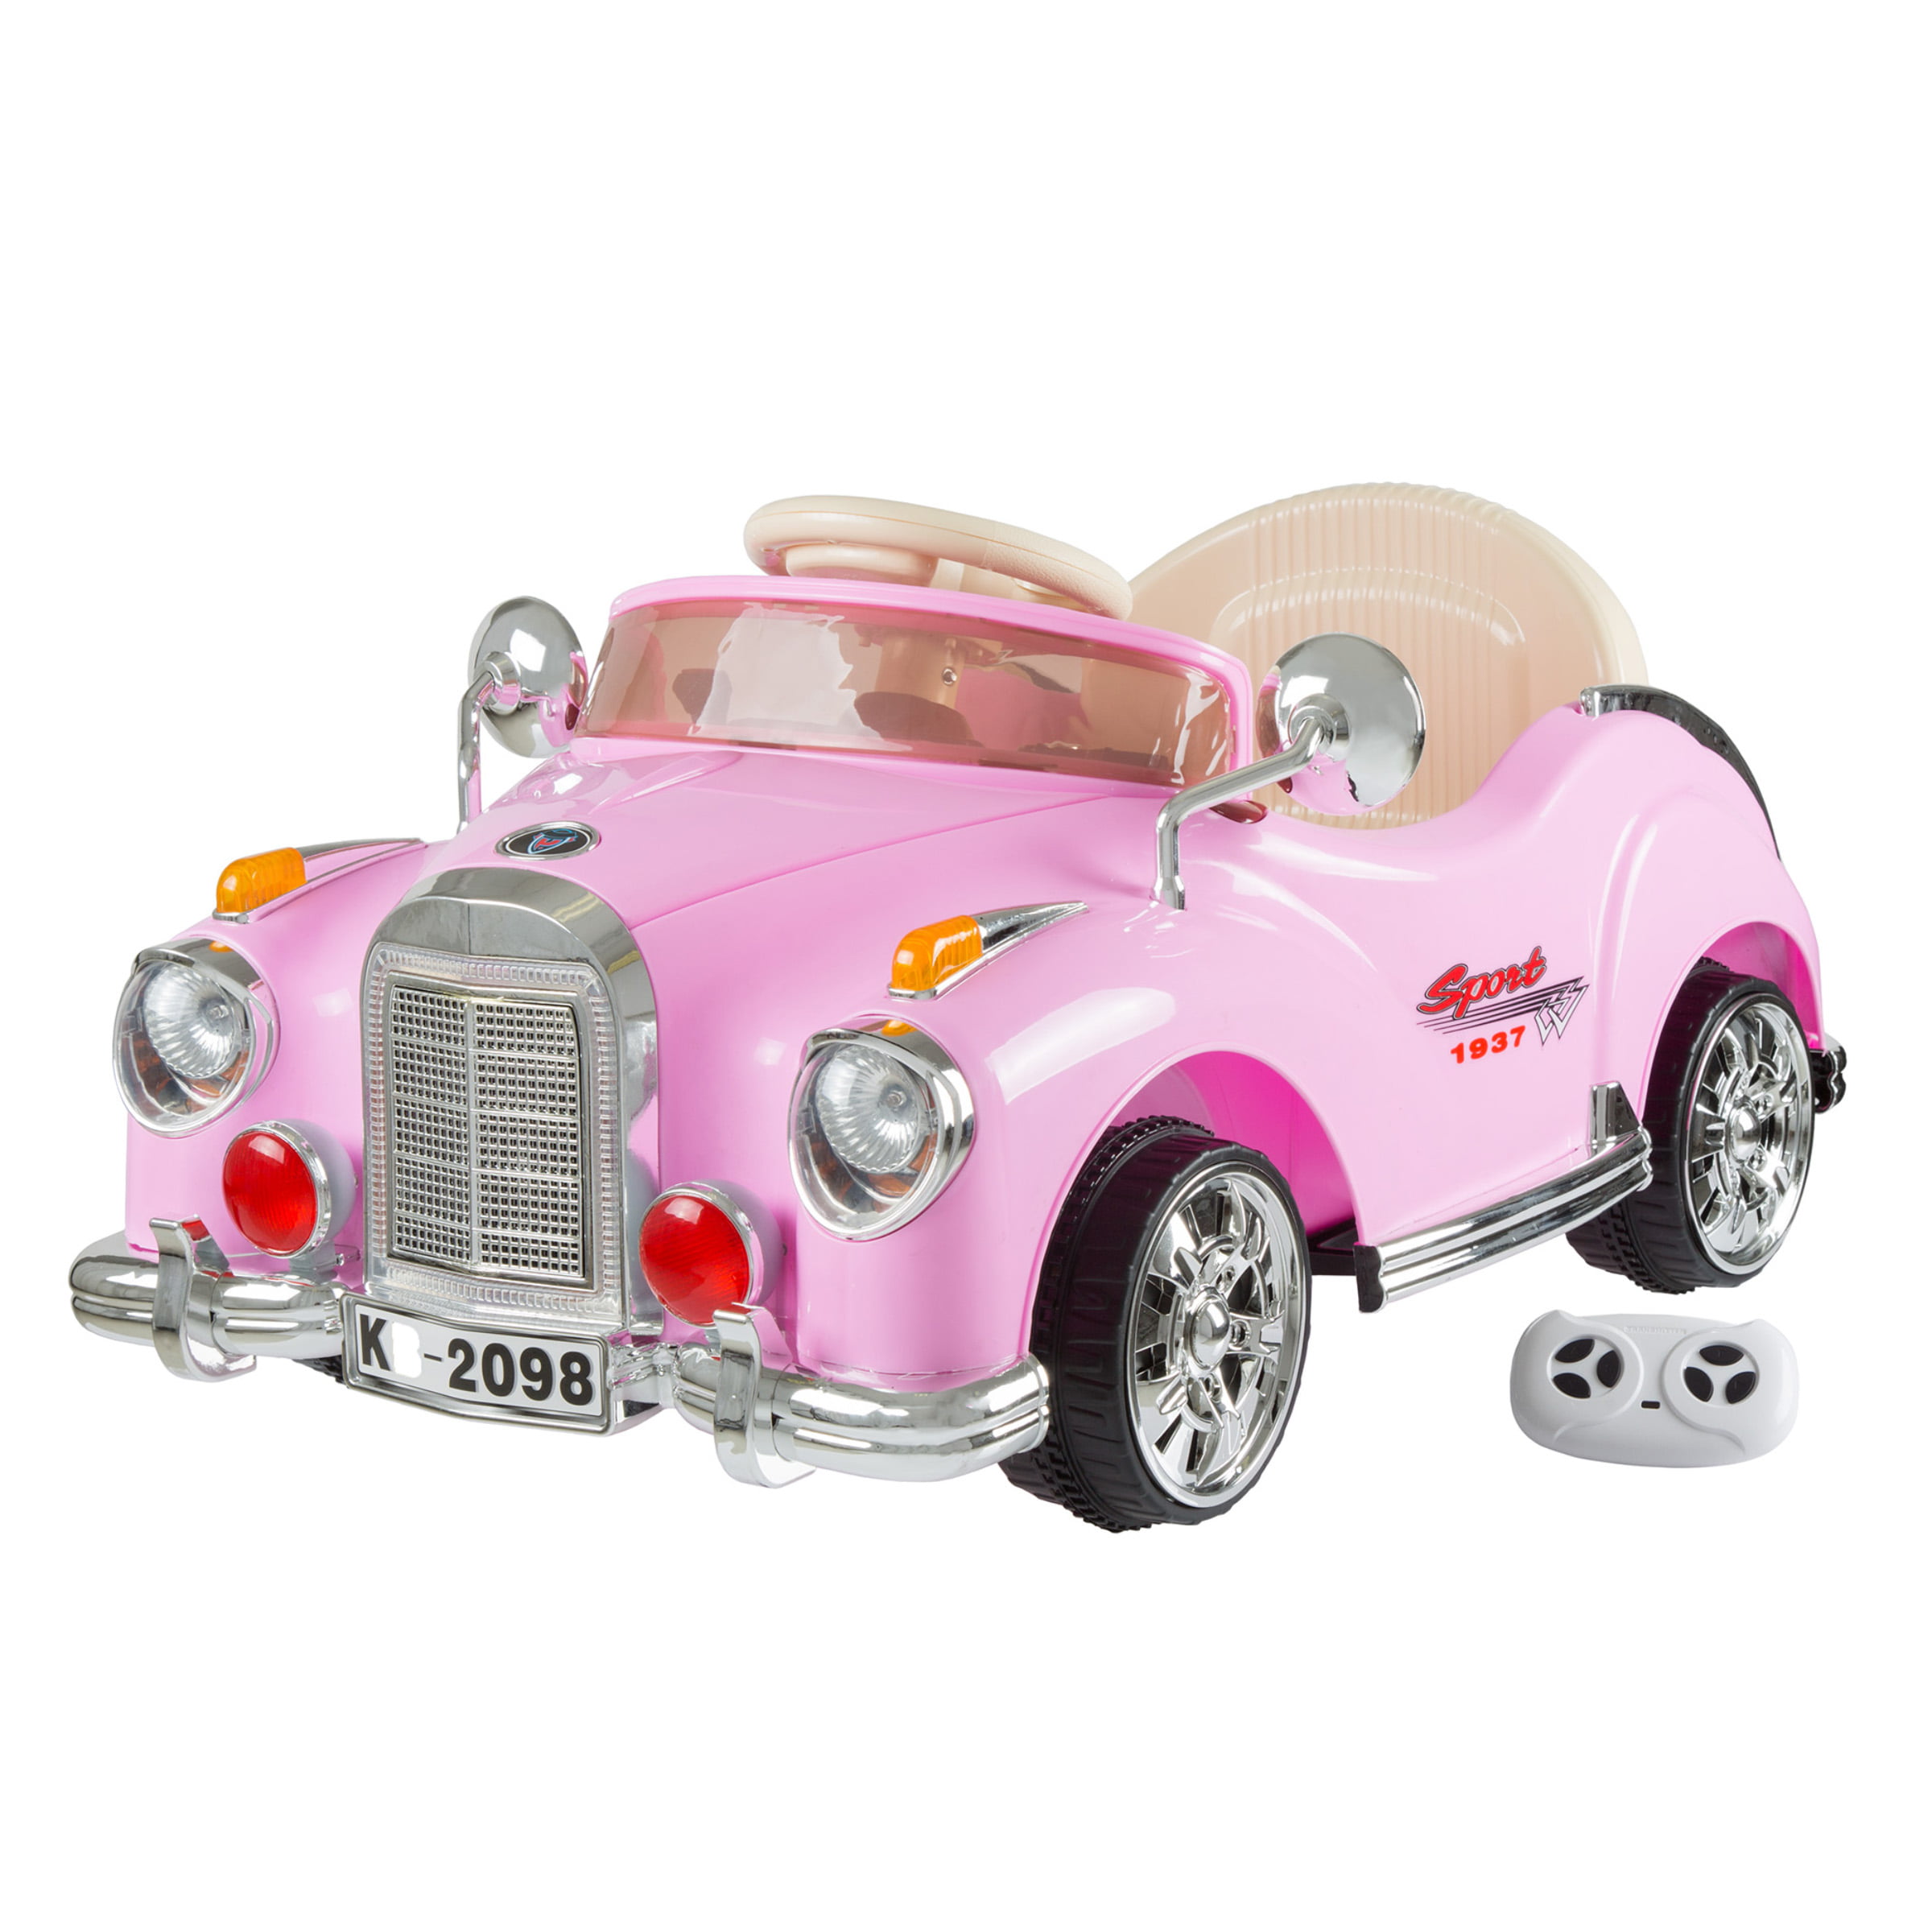 remote car for 3 year old